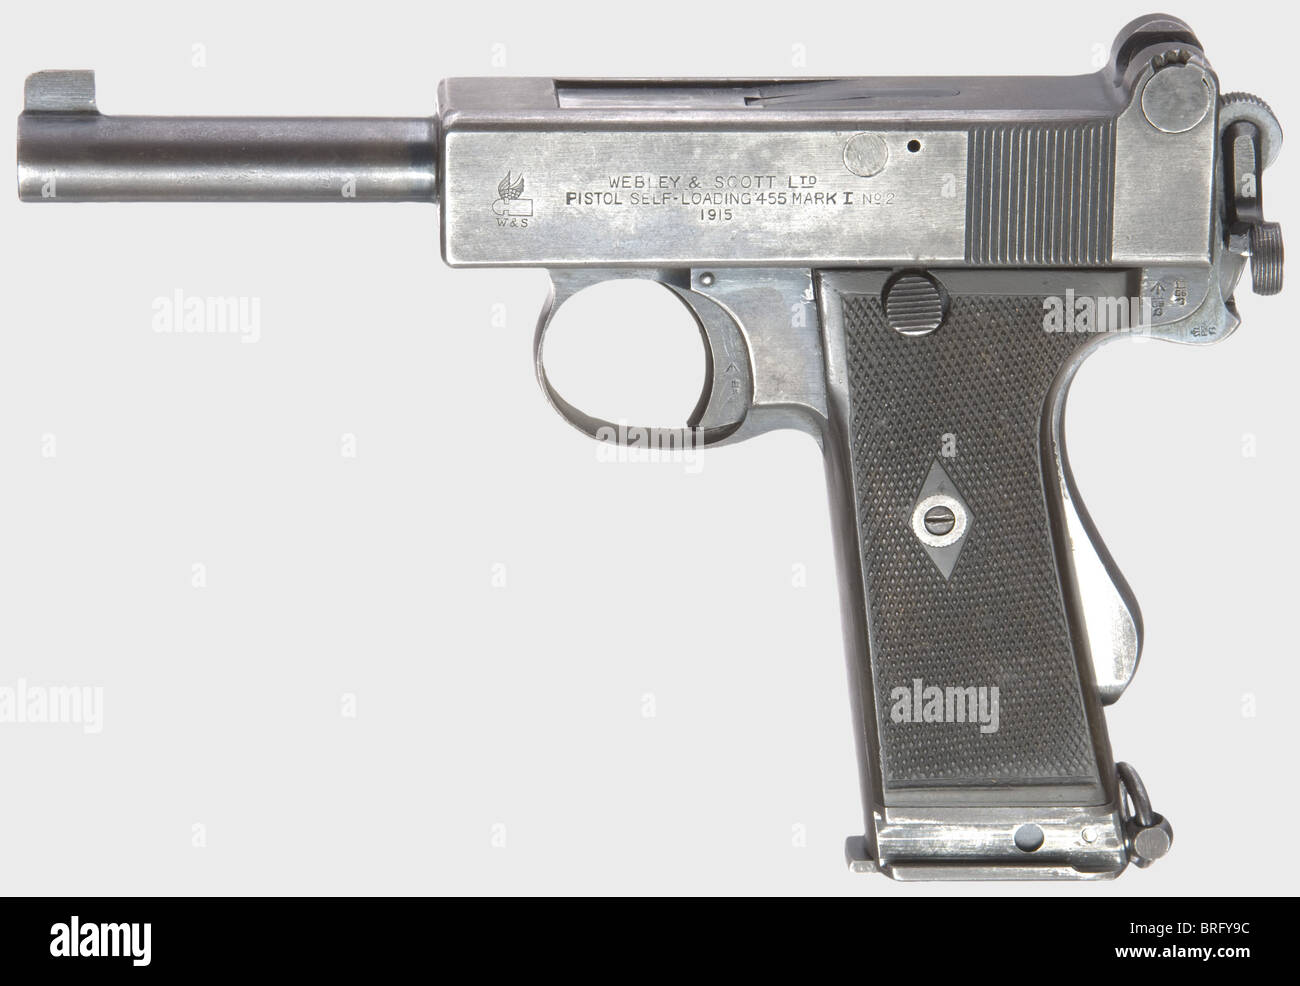 A Webley & Scott Mark I No. 2,Mod. 1912 RHA(Royal Horse Artillery),cal..455,no. 6396. Matching numbers. Bright bore. 1915 manufacture. 7-shot. Elevation stud from 50 - 200 yards,hammer safety,grip safety,slot for shoulder stock. Left on slide 3-line inscription 'Webley & Scott Ltd. / Pistol Self-Loading .455 Mark I No.2 / 1915'. Several broad arrow acceptances. Matt original finish,shady,left and right on slide partially thin. Black hard rubber grip panels. Magazine. Lanyard loop. Good to very good condition. Extremely rare pistol,total manufacture me,Additional-Rights-Clearences-Not Available Stock Photo